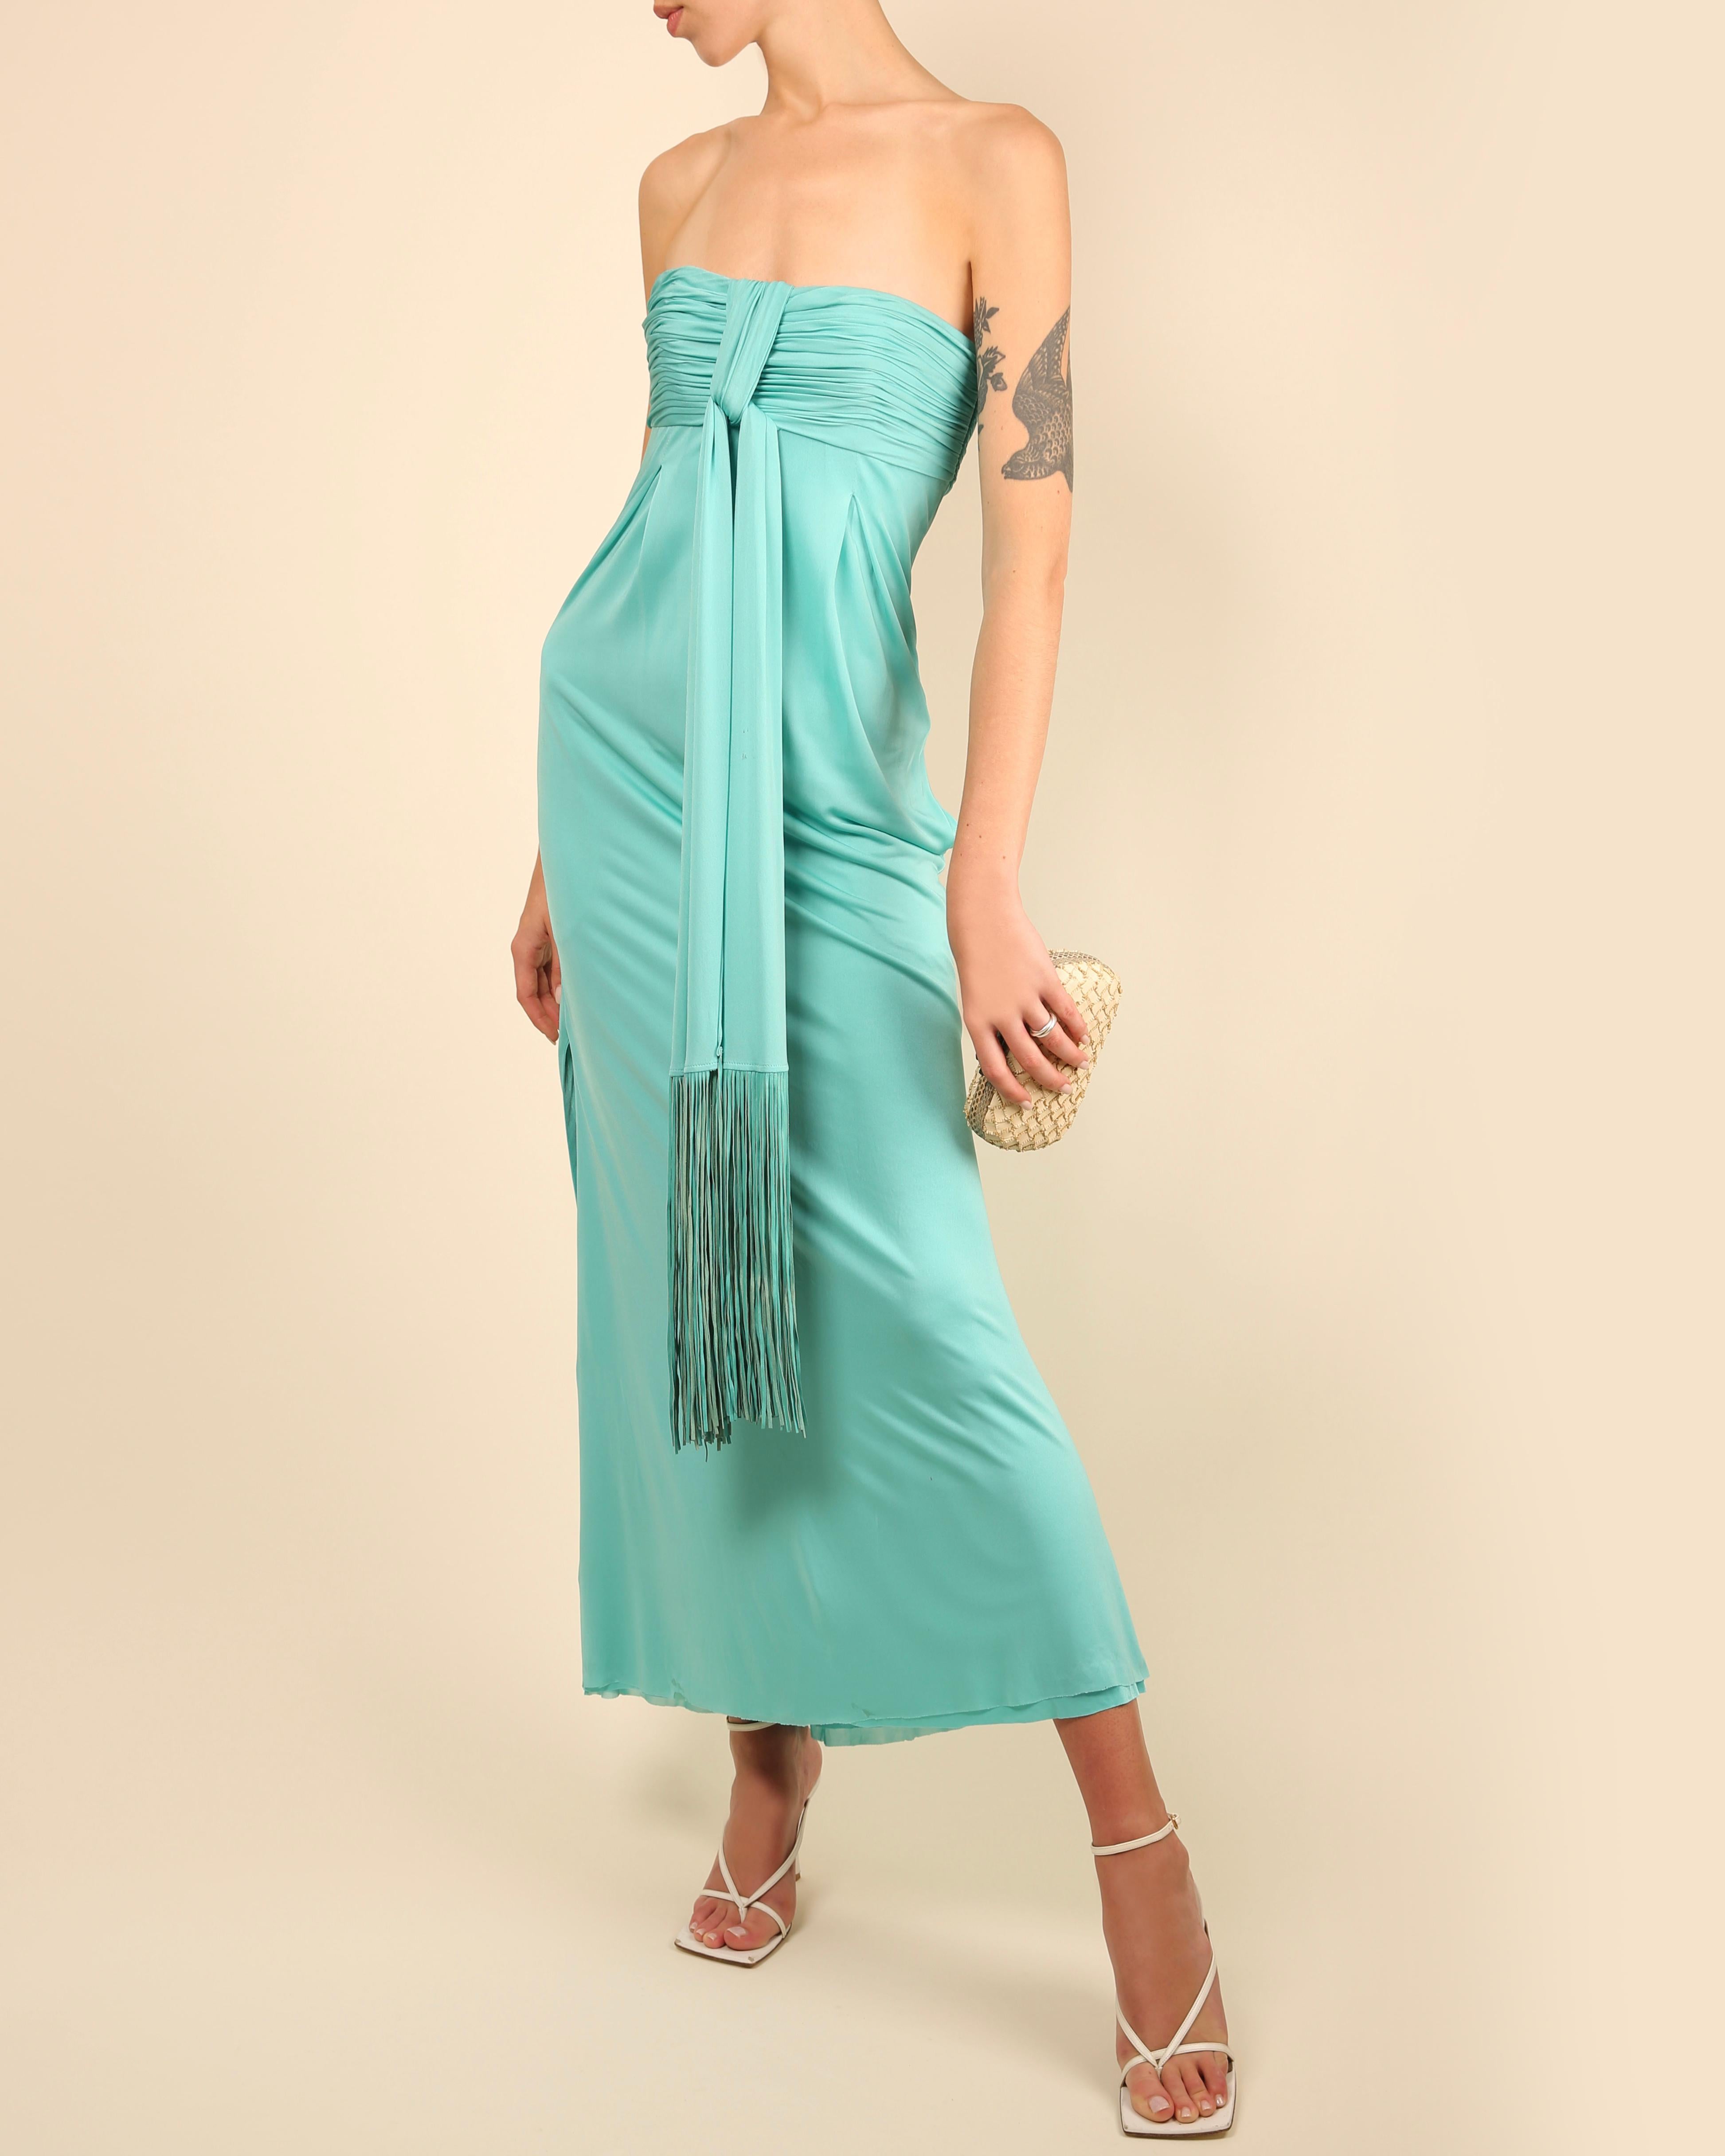 LOVE LALI Vintage

Versace Spring Summer 2008 strapless dress in turquoise
Ruched bust
Inner boned corset with underwired cups
Long ties at the bust with long leather tassels, these can be knotted, tied, wrapped around the body...
Double